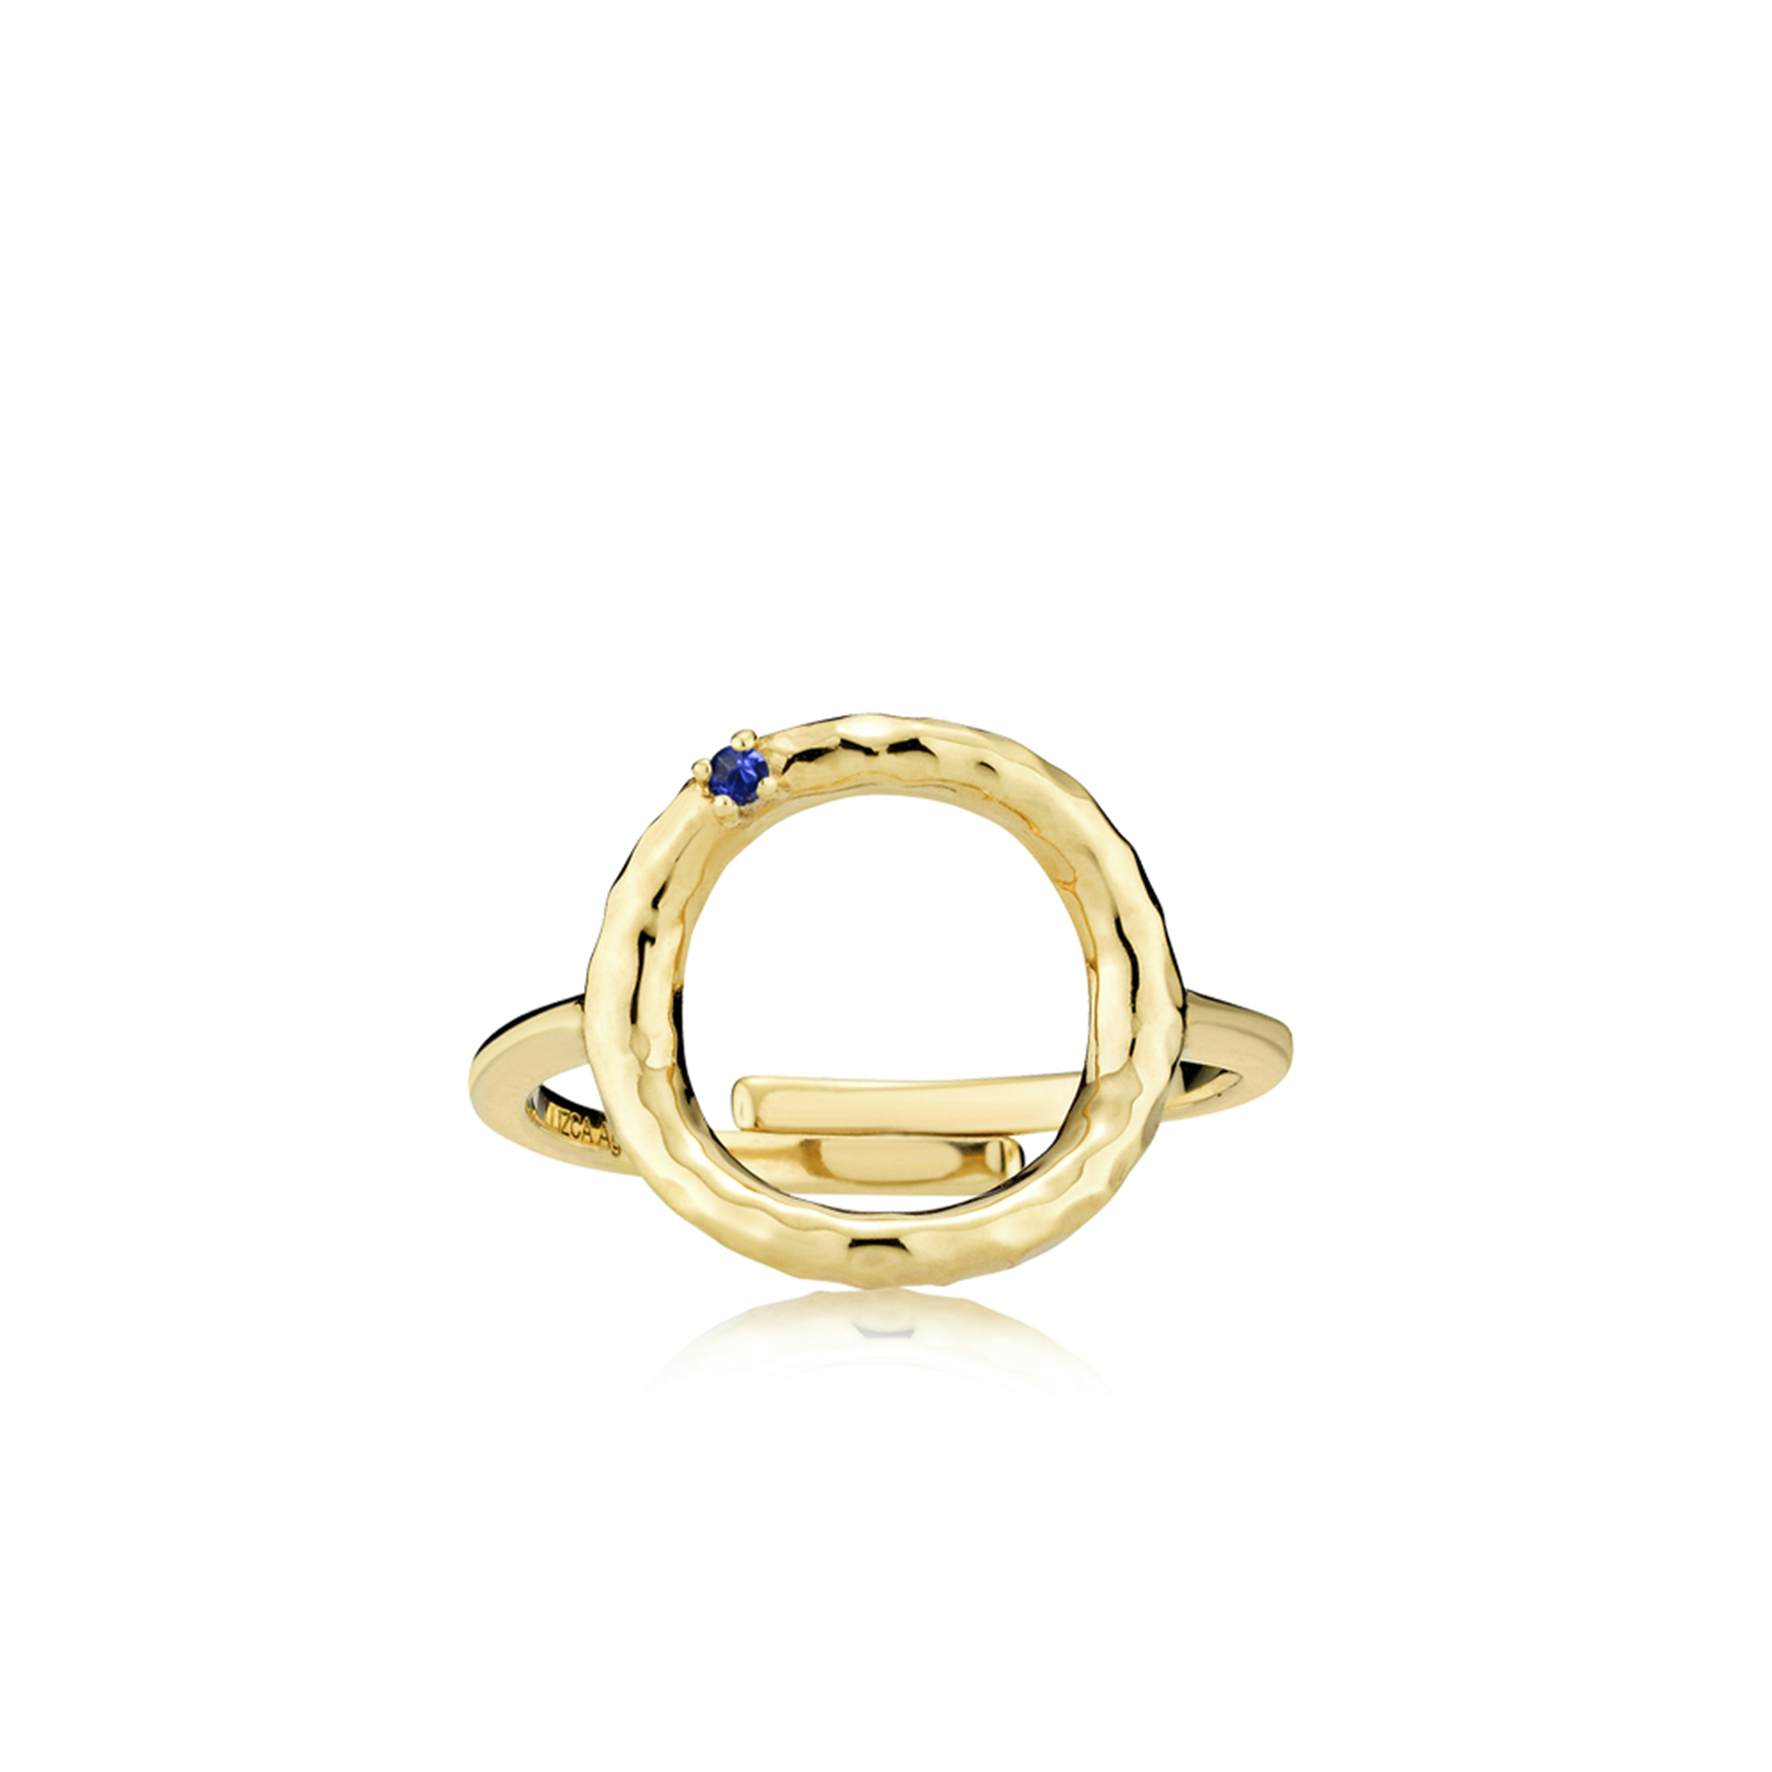 Anabel By Sistie Ring from Sistie in Goldplated-Silver Sterling 925